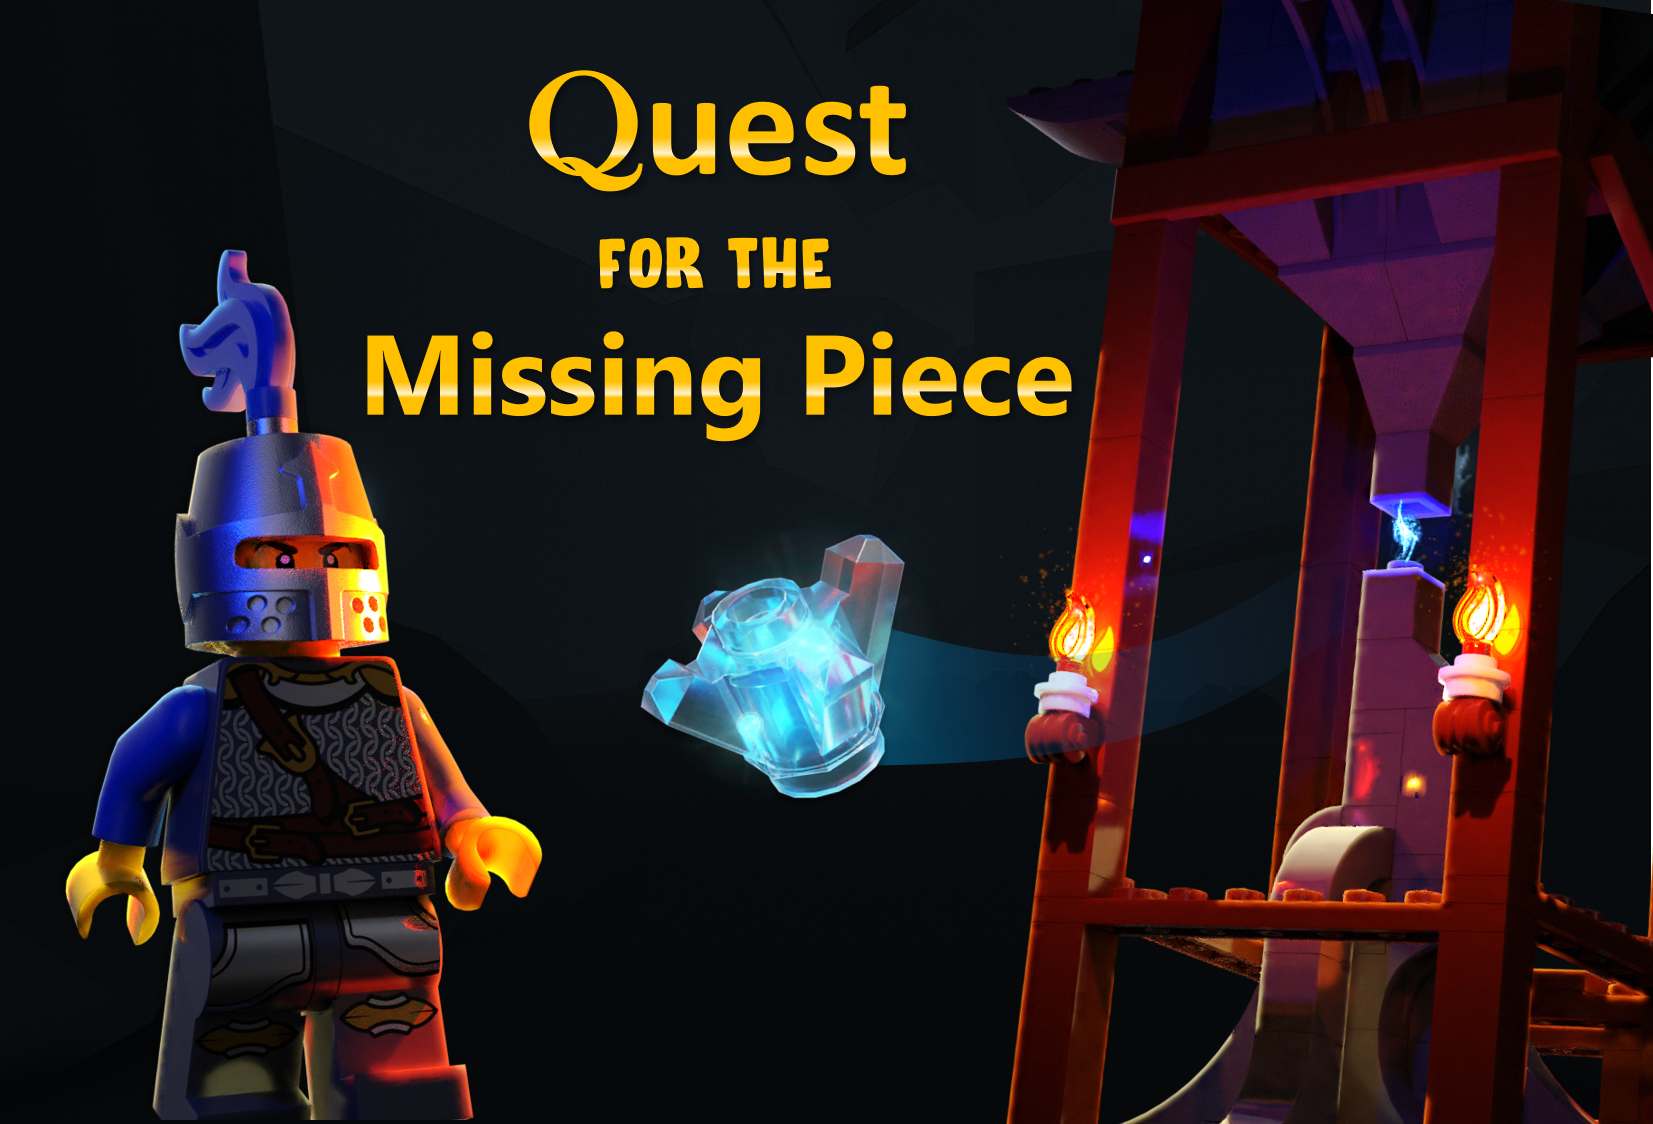 Quest for the Missing Piece